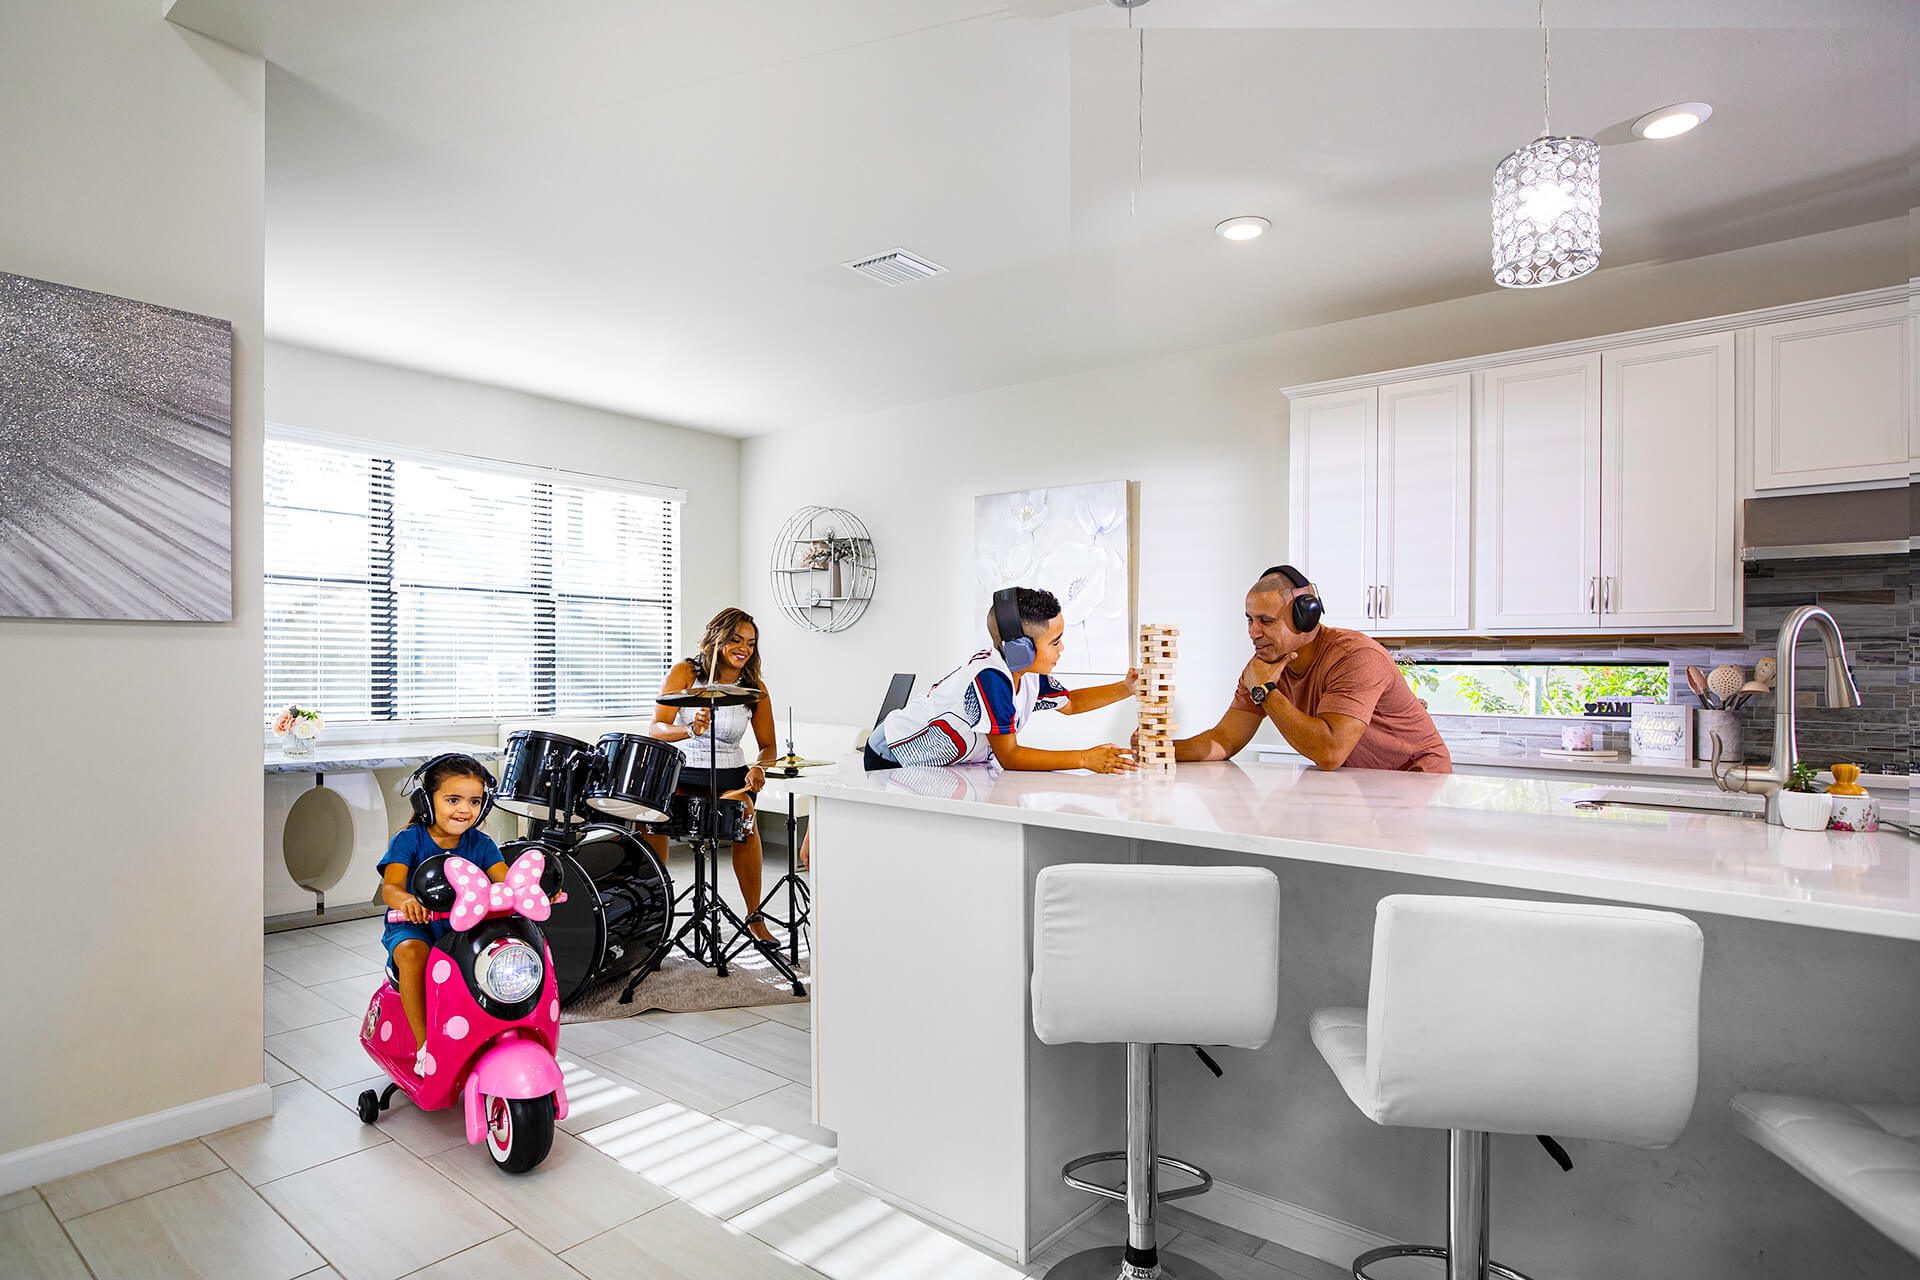 A family in the kitchen playing drums, Jenga, and riding an electric scooter